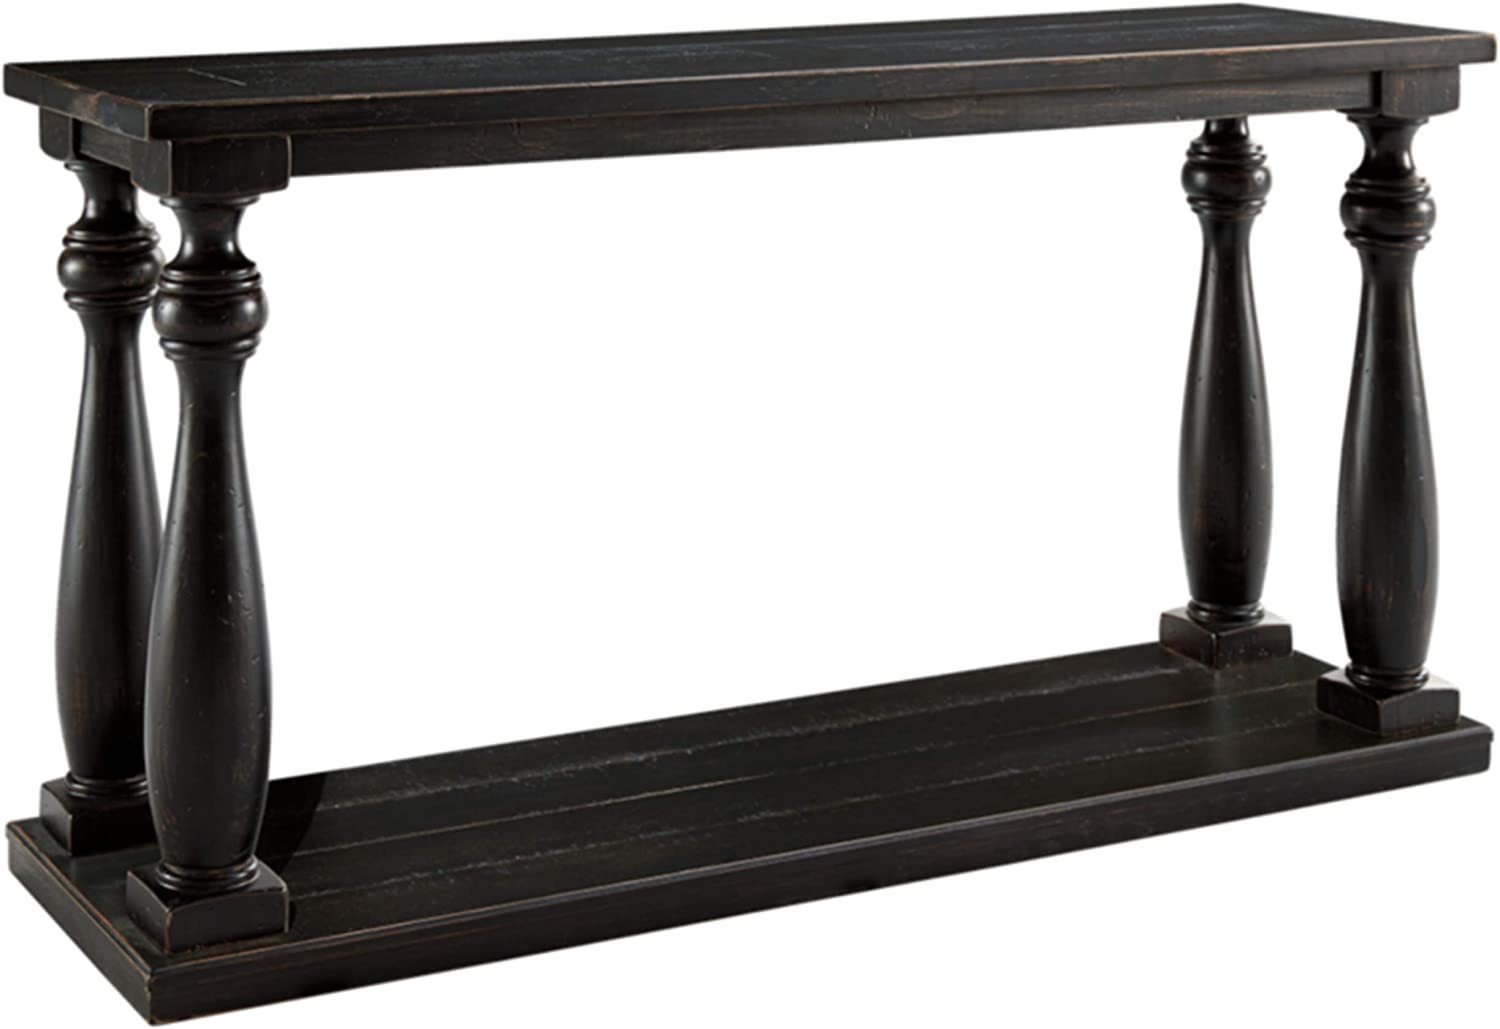 Signature Design by Ashley Mallacar Rustic Cottage Rectangular Sofa Table with - $353.99